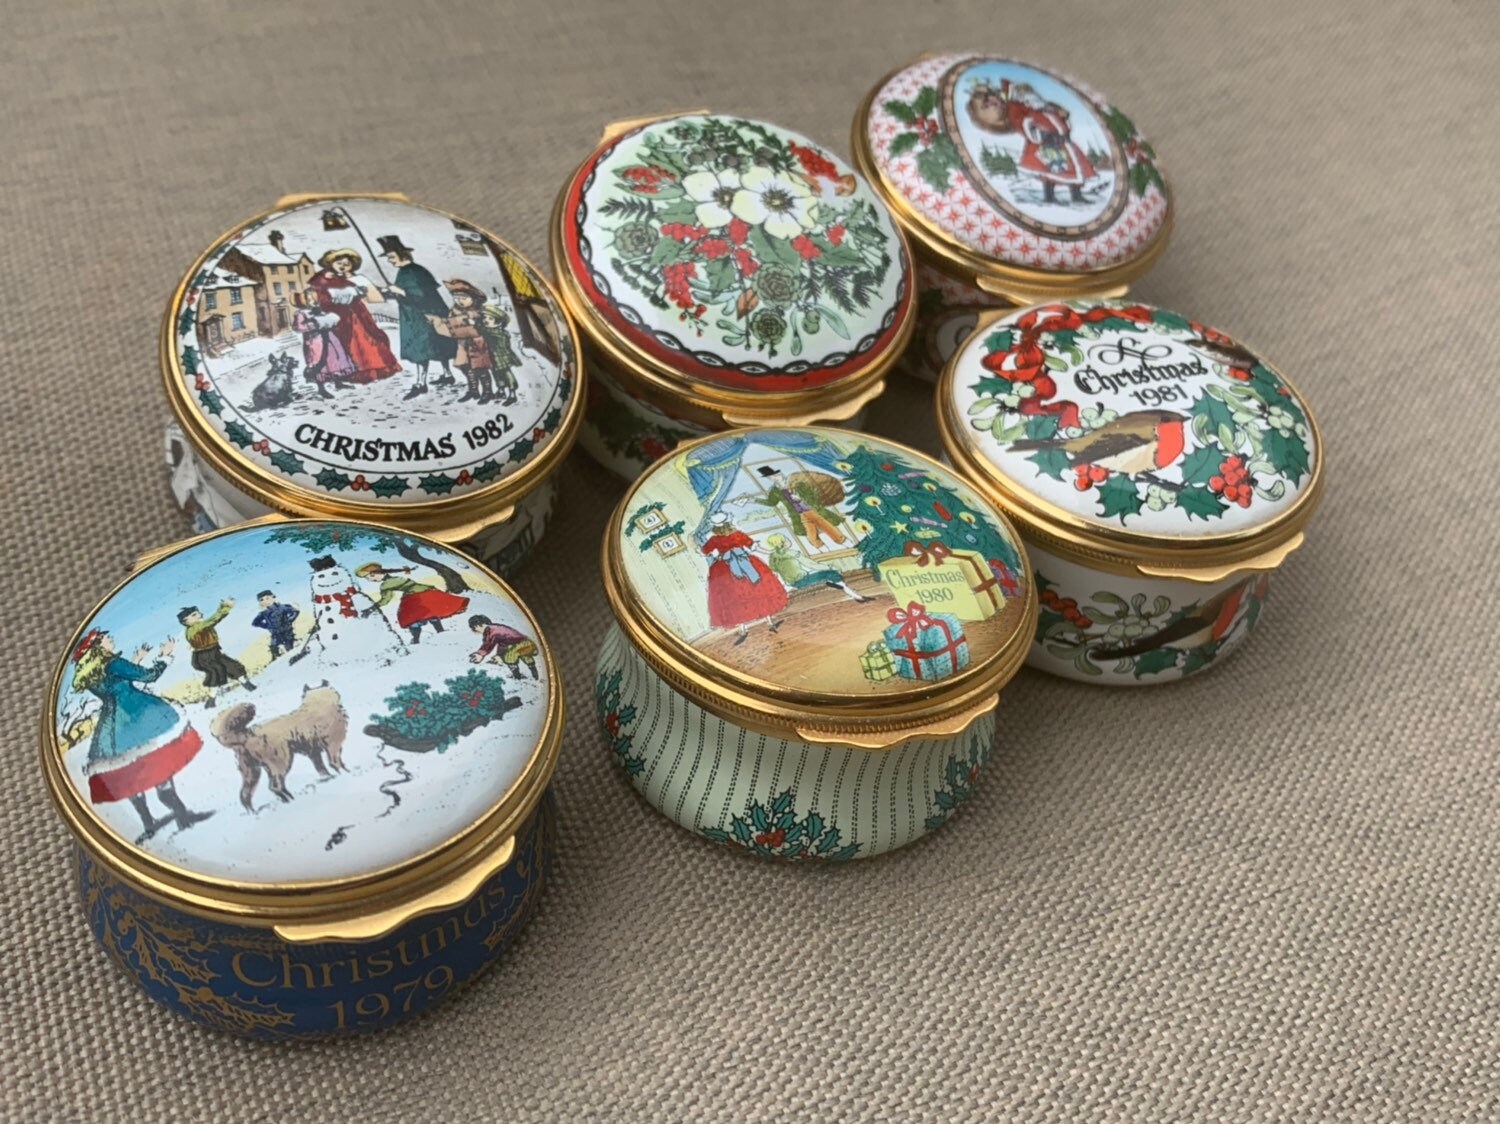 Six Halcyon Days Enamels Christmas Trinket Pill Boxes - Absolute Bargain